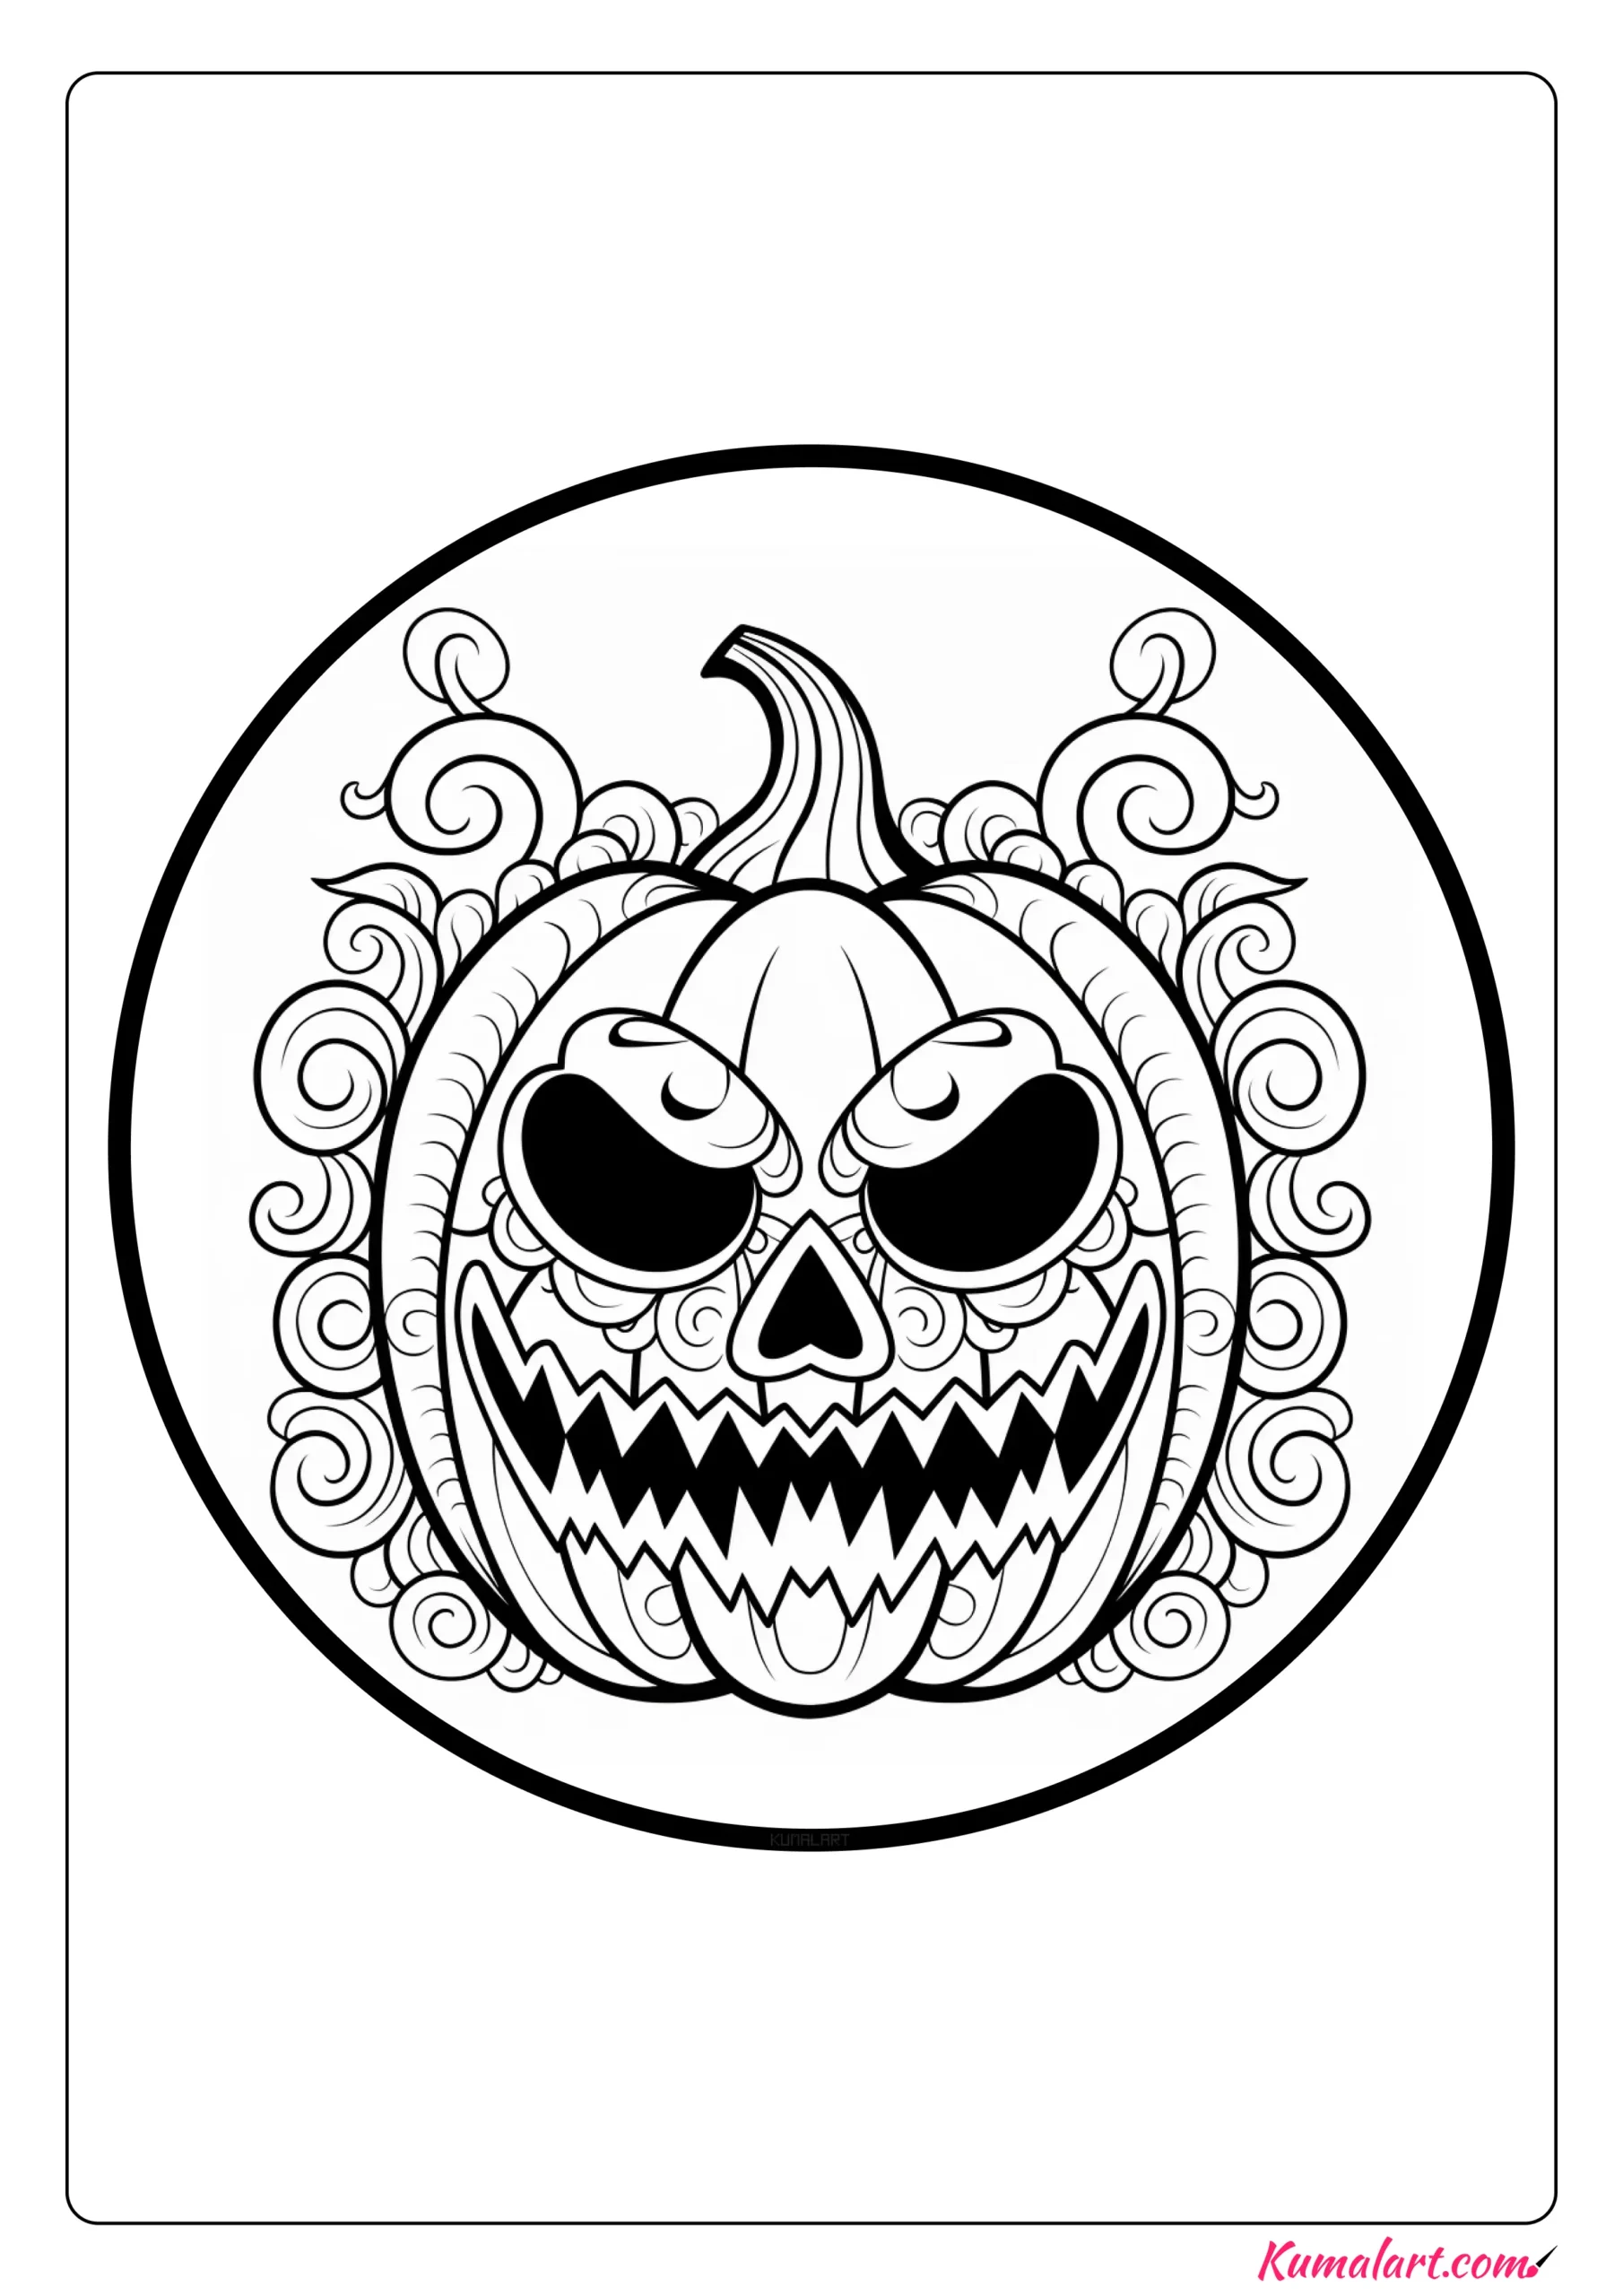 Revolting Scary Pumpkin Coloring Page